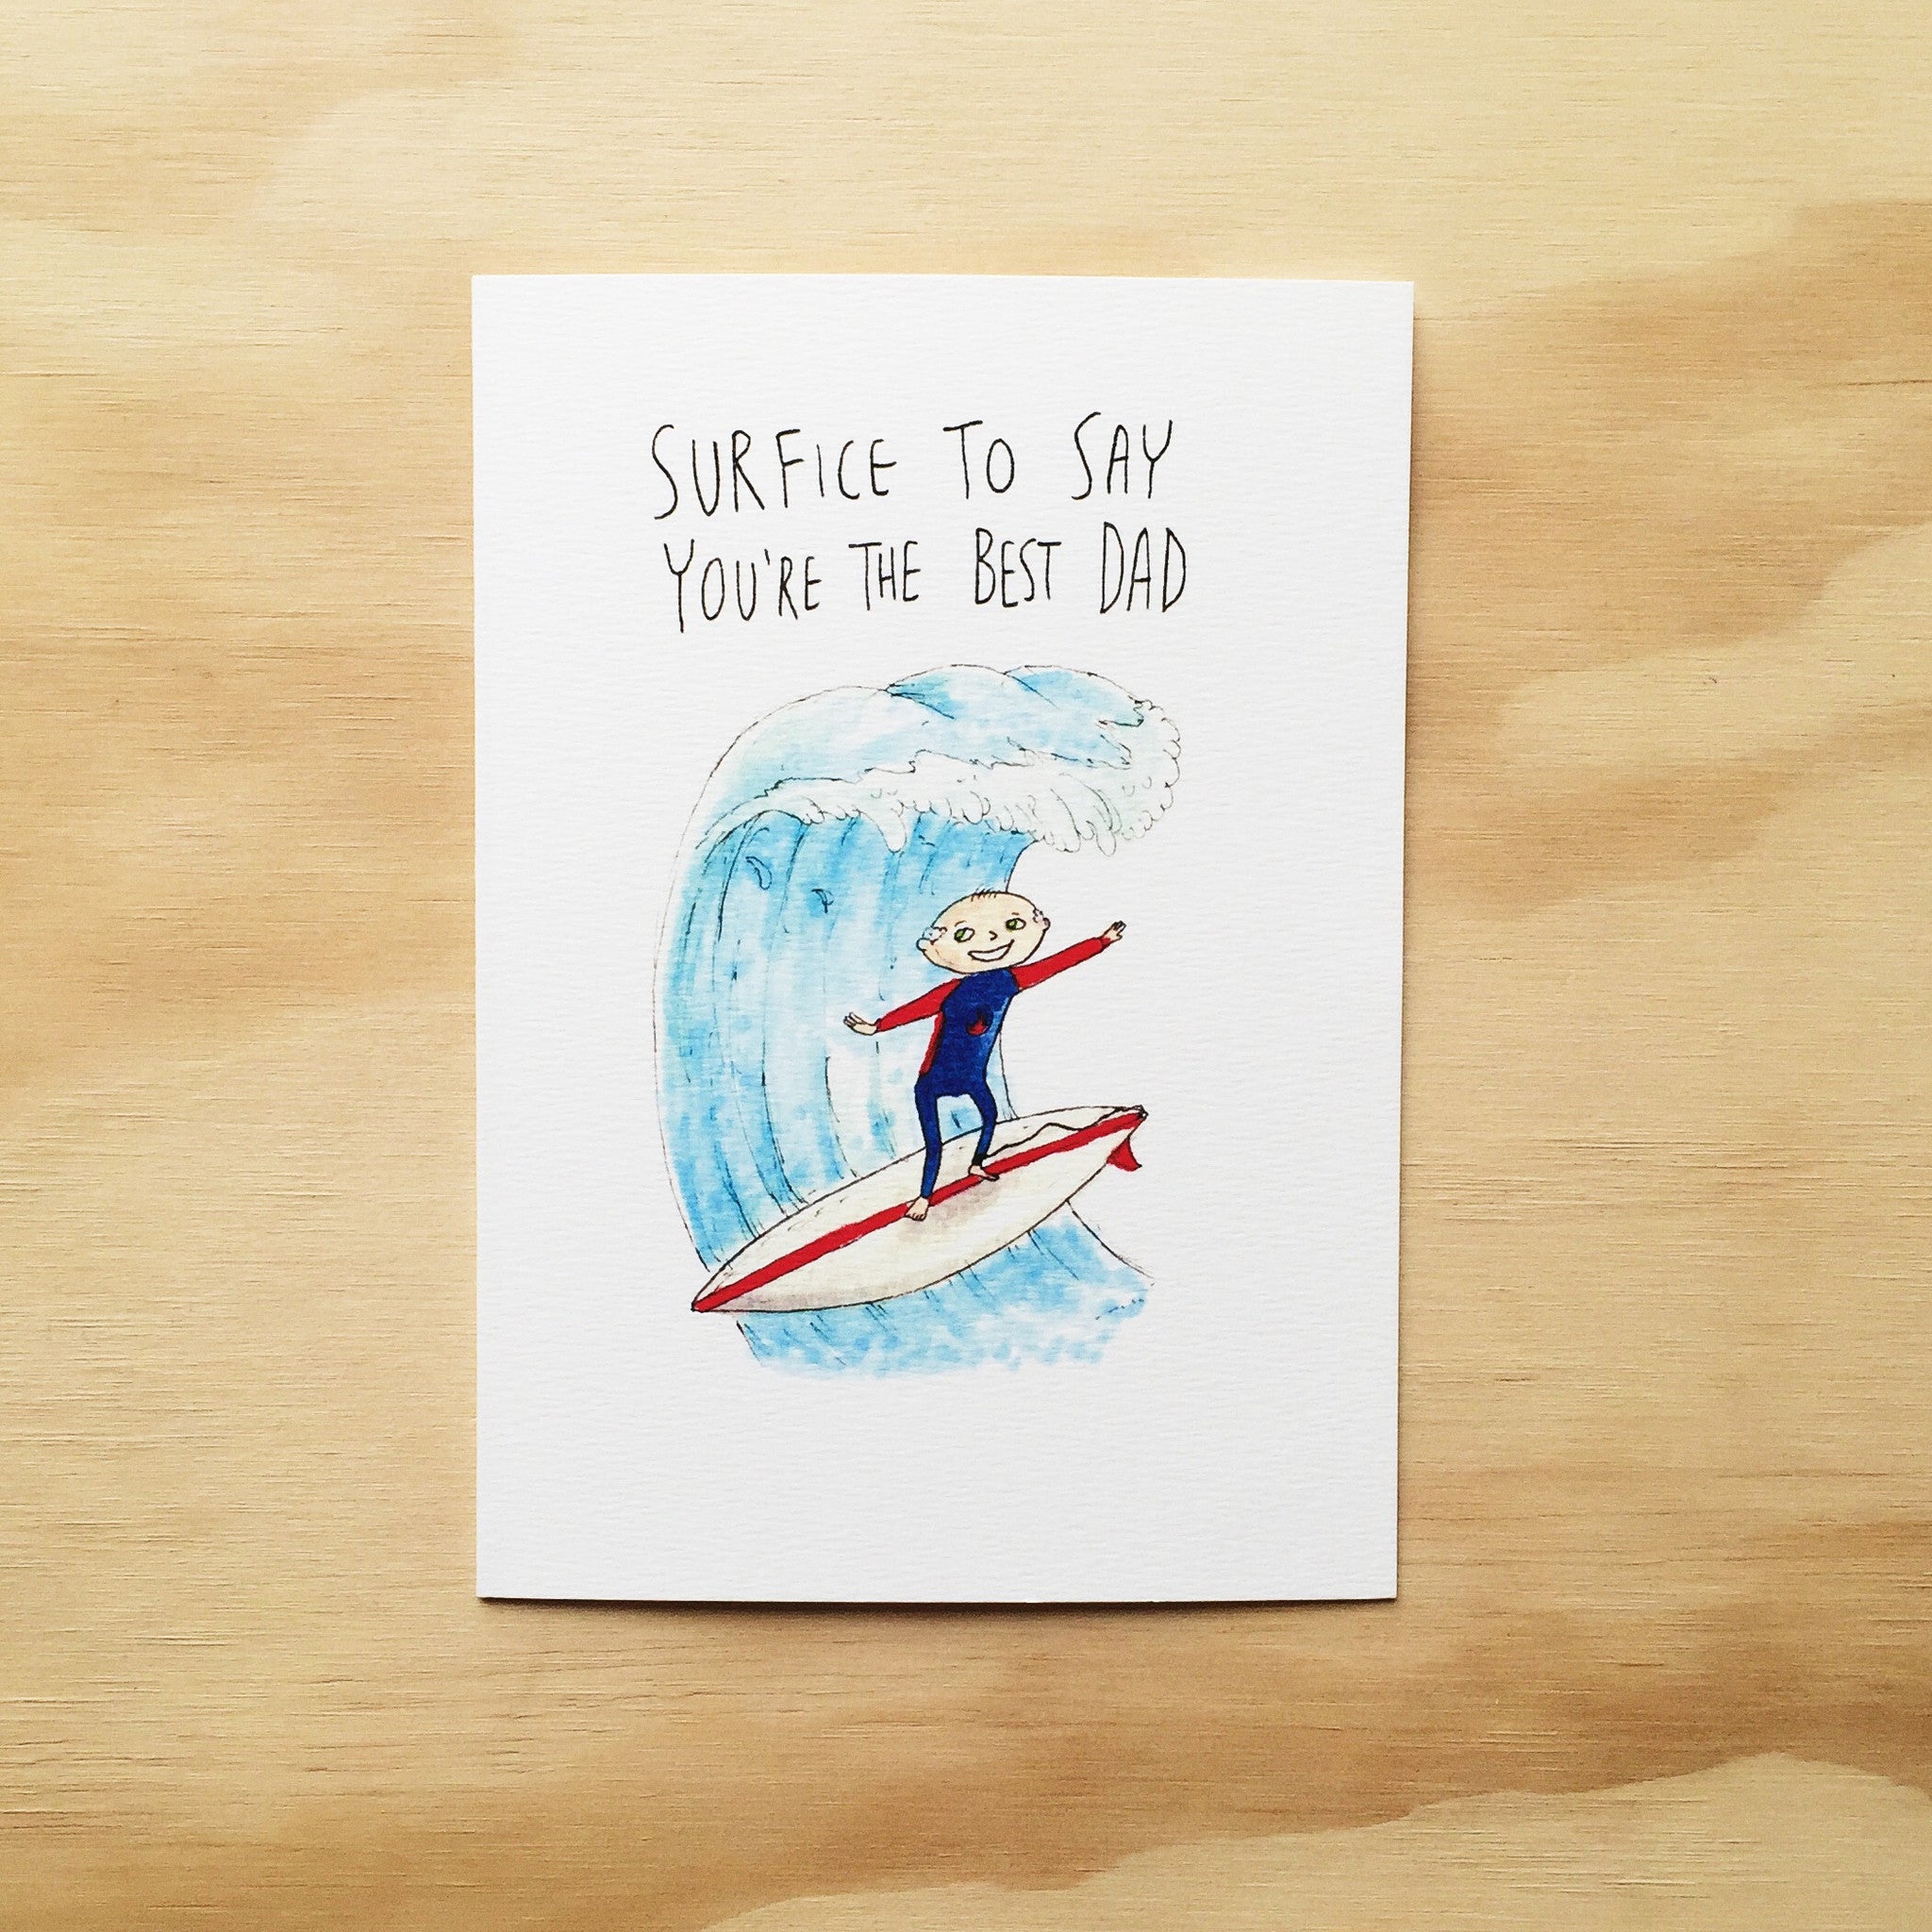 Surfice to Say, You're The Best Dad - Well Drawn